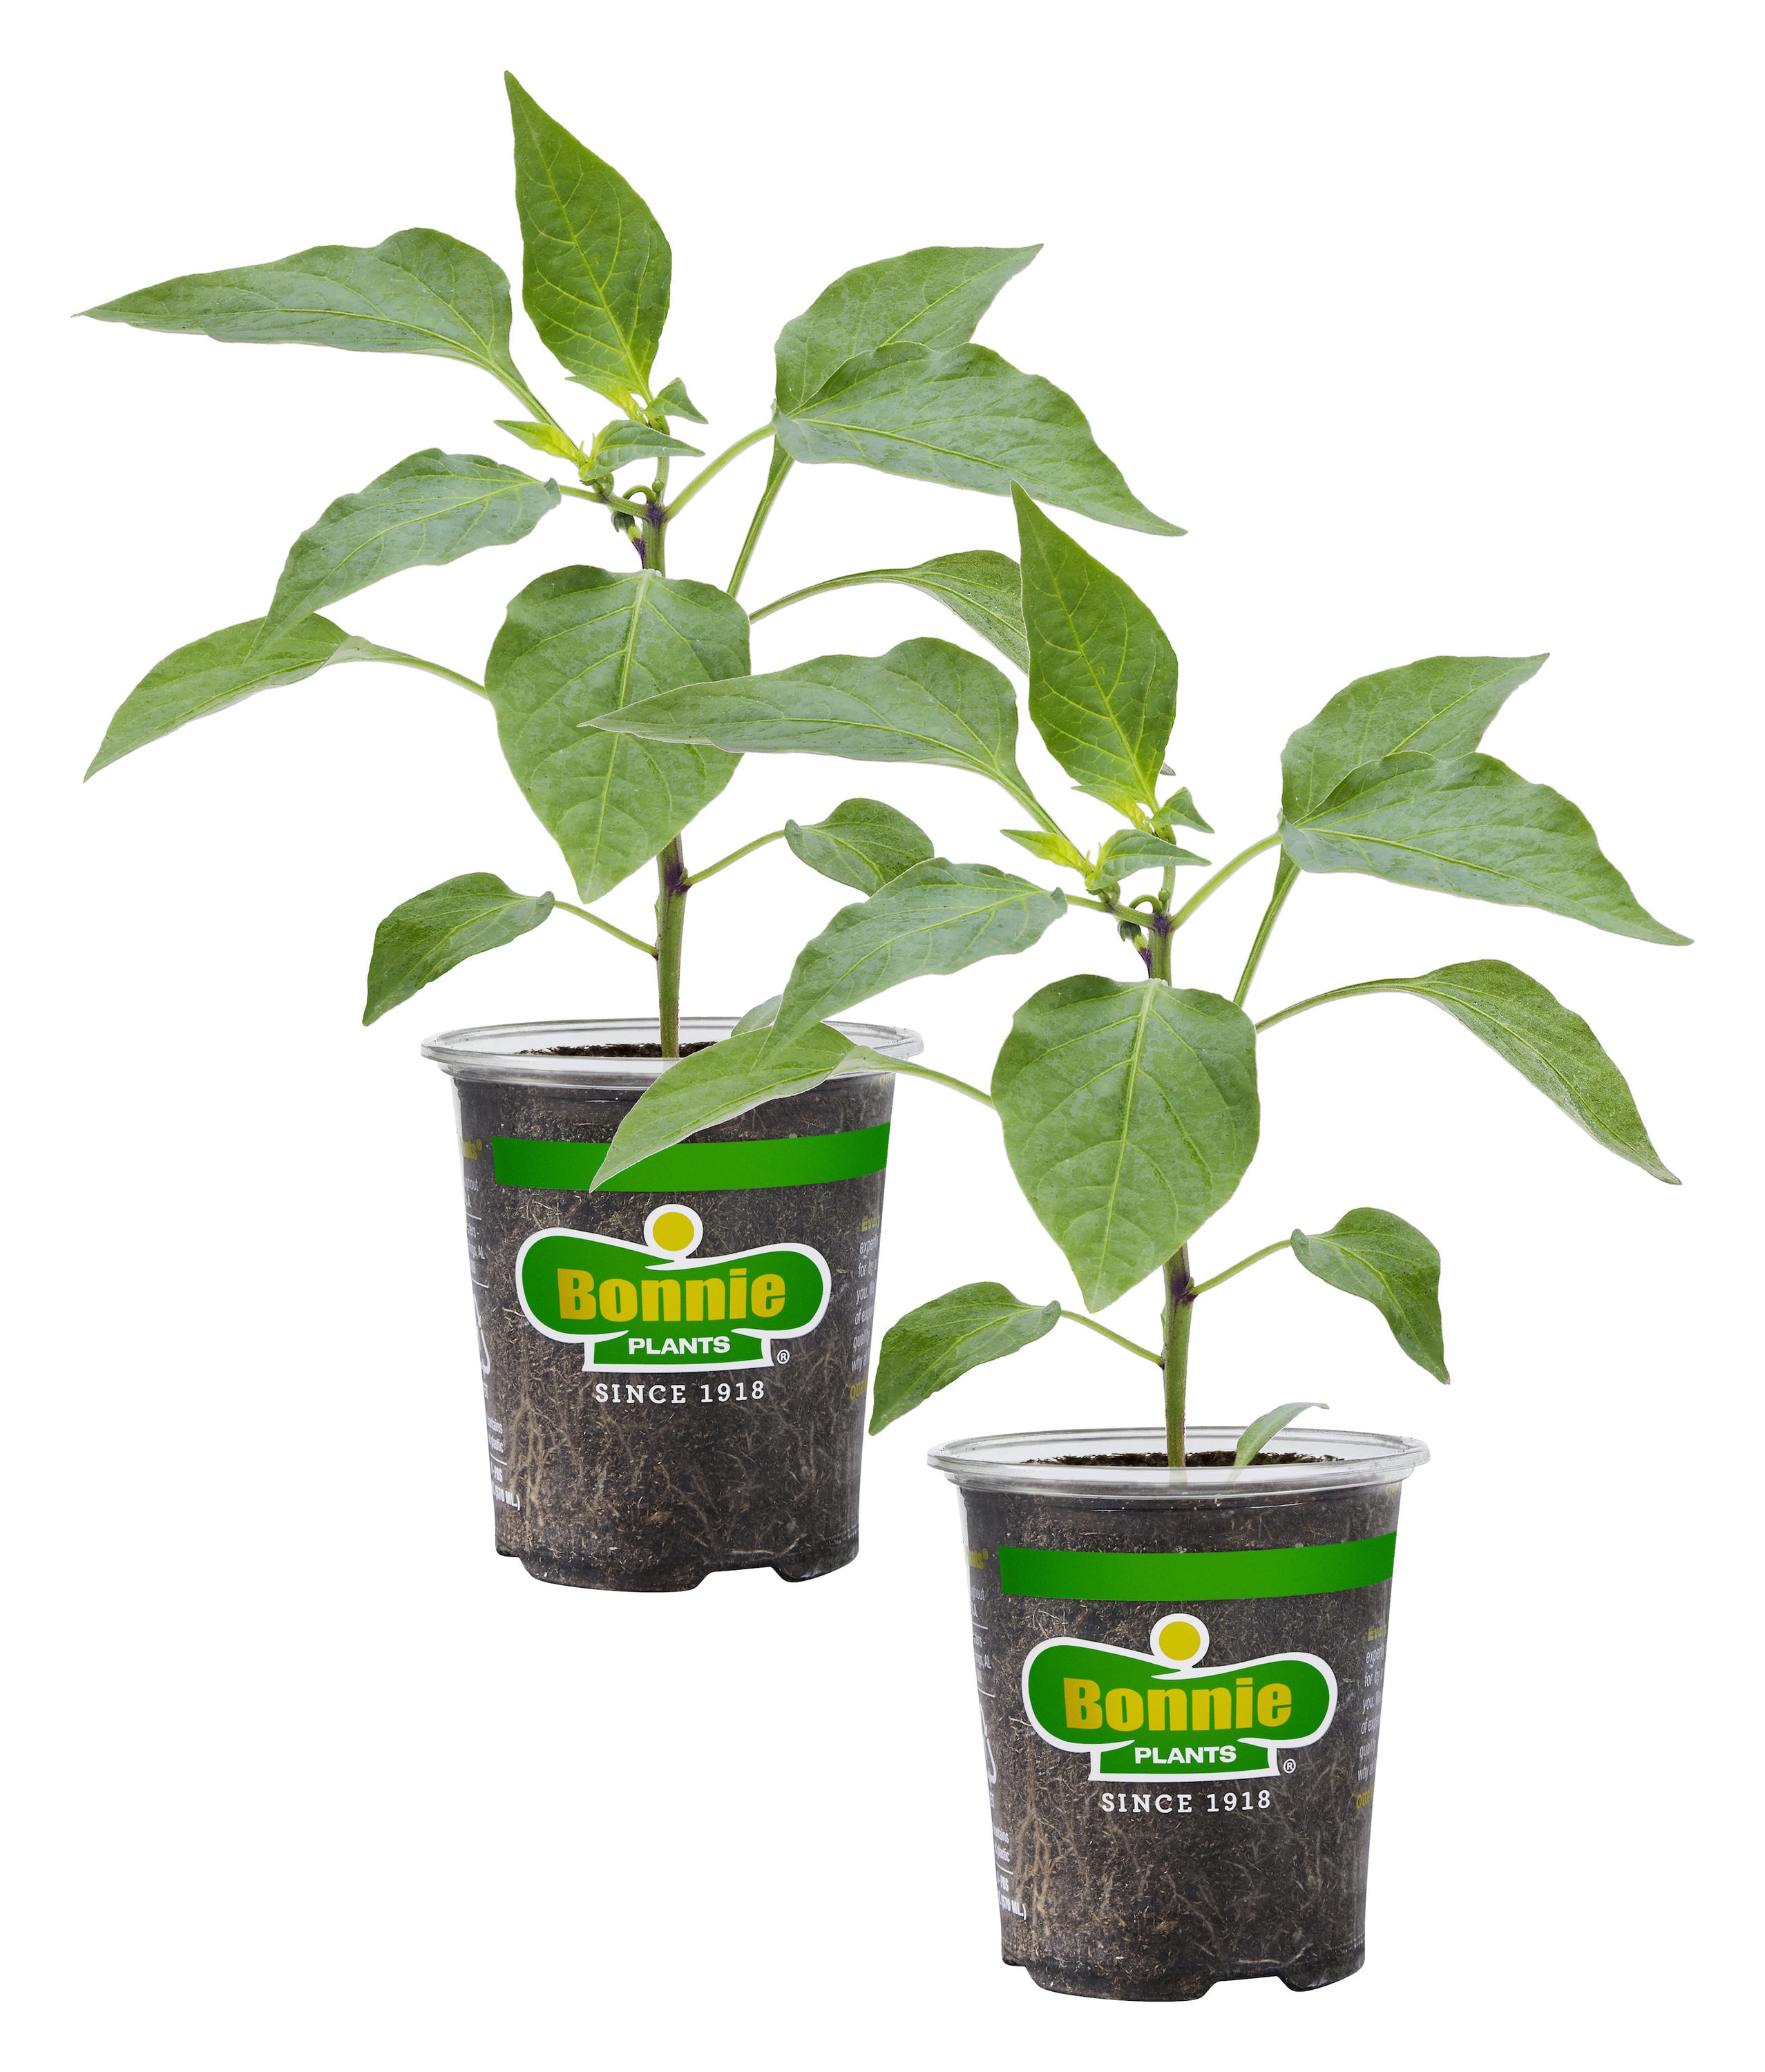 bonnie plants 2-pack red bell pepper plant in 19.3-oz pot in the